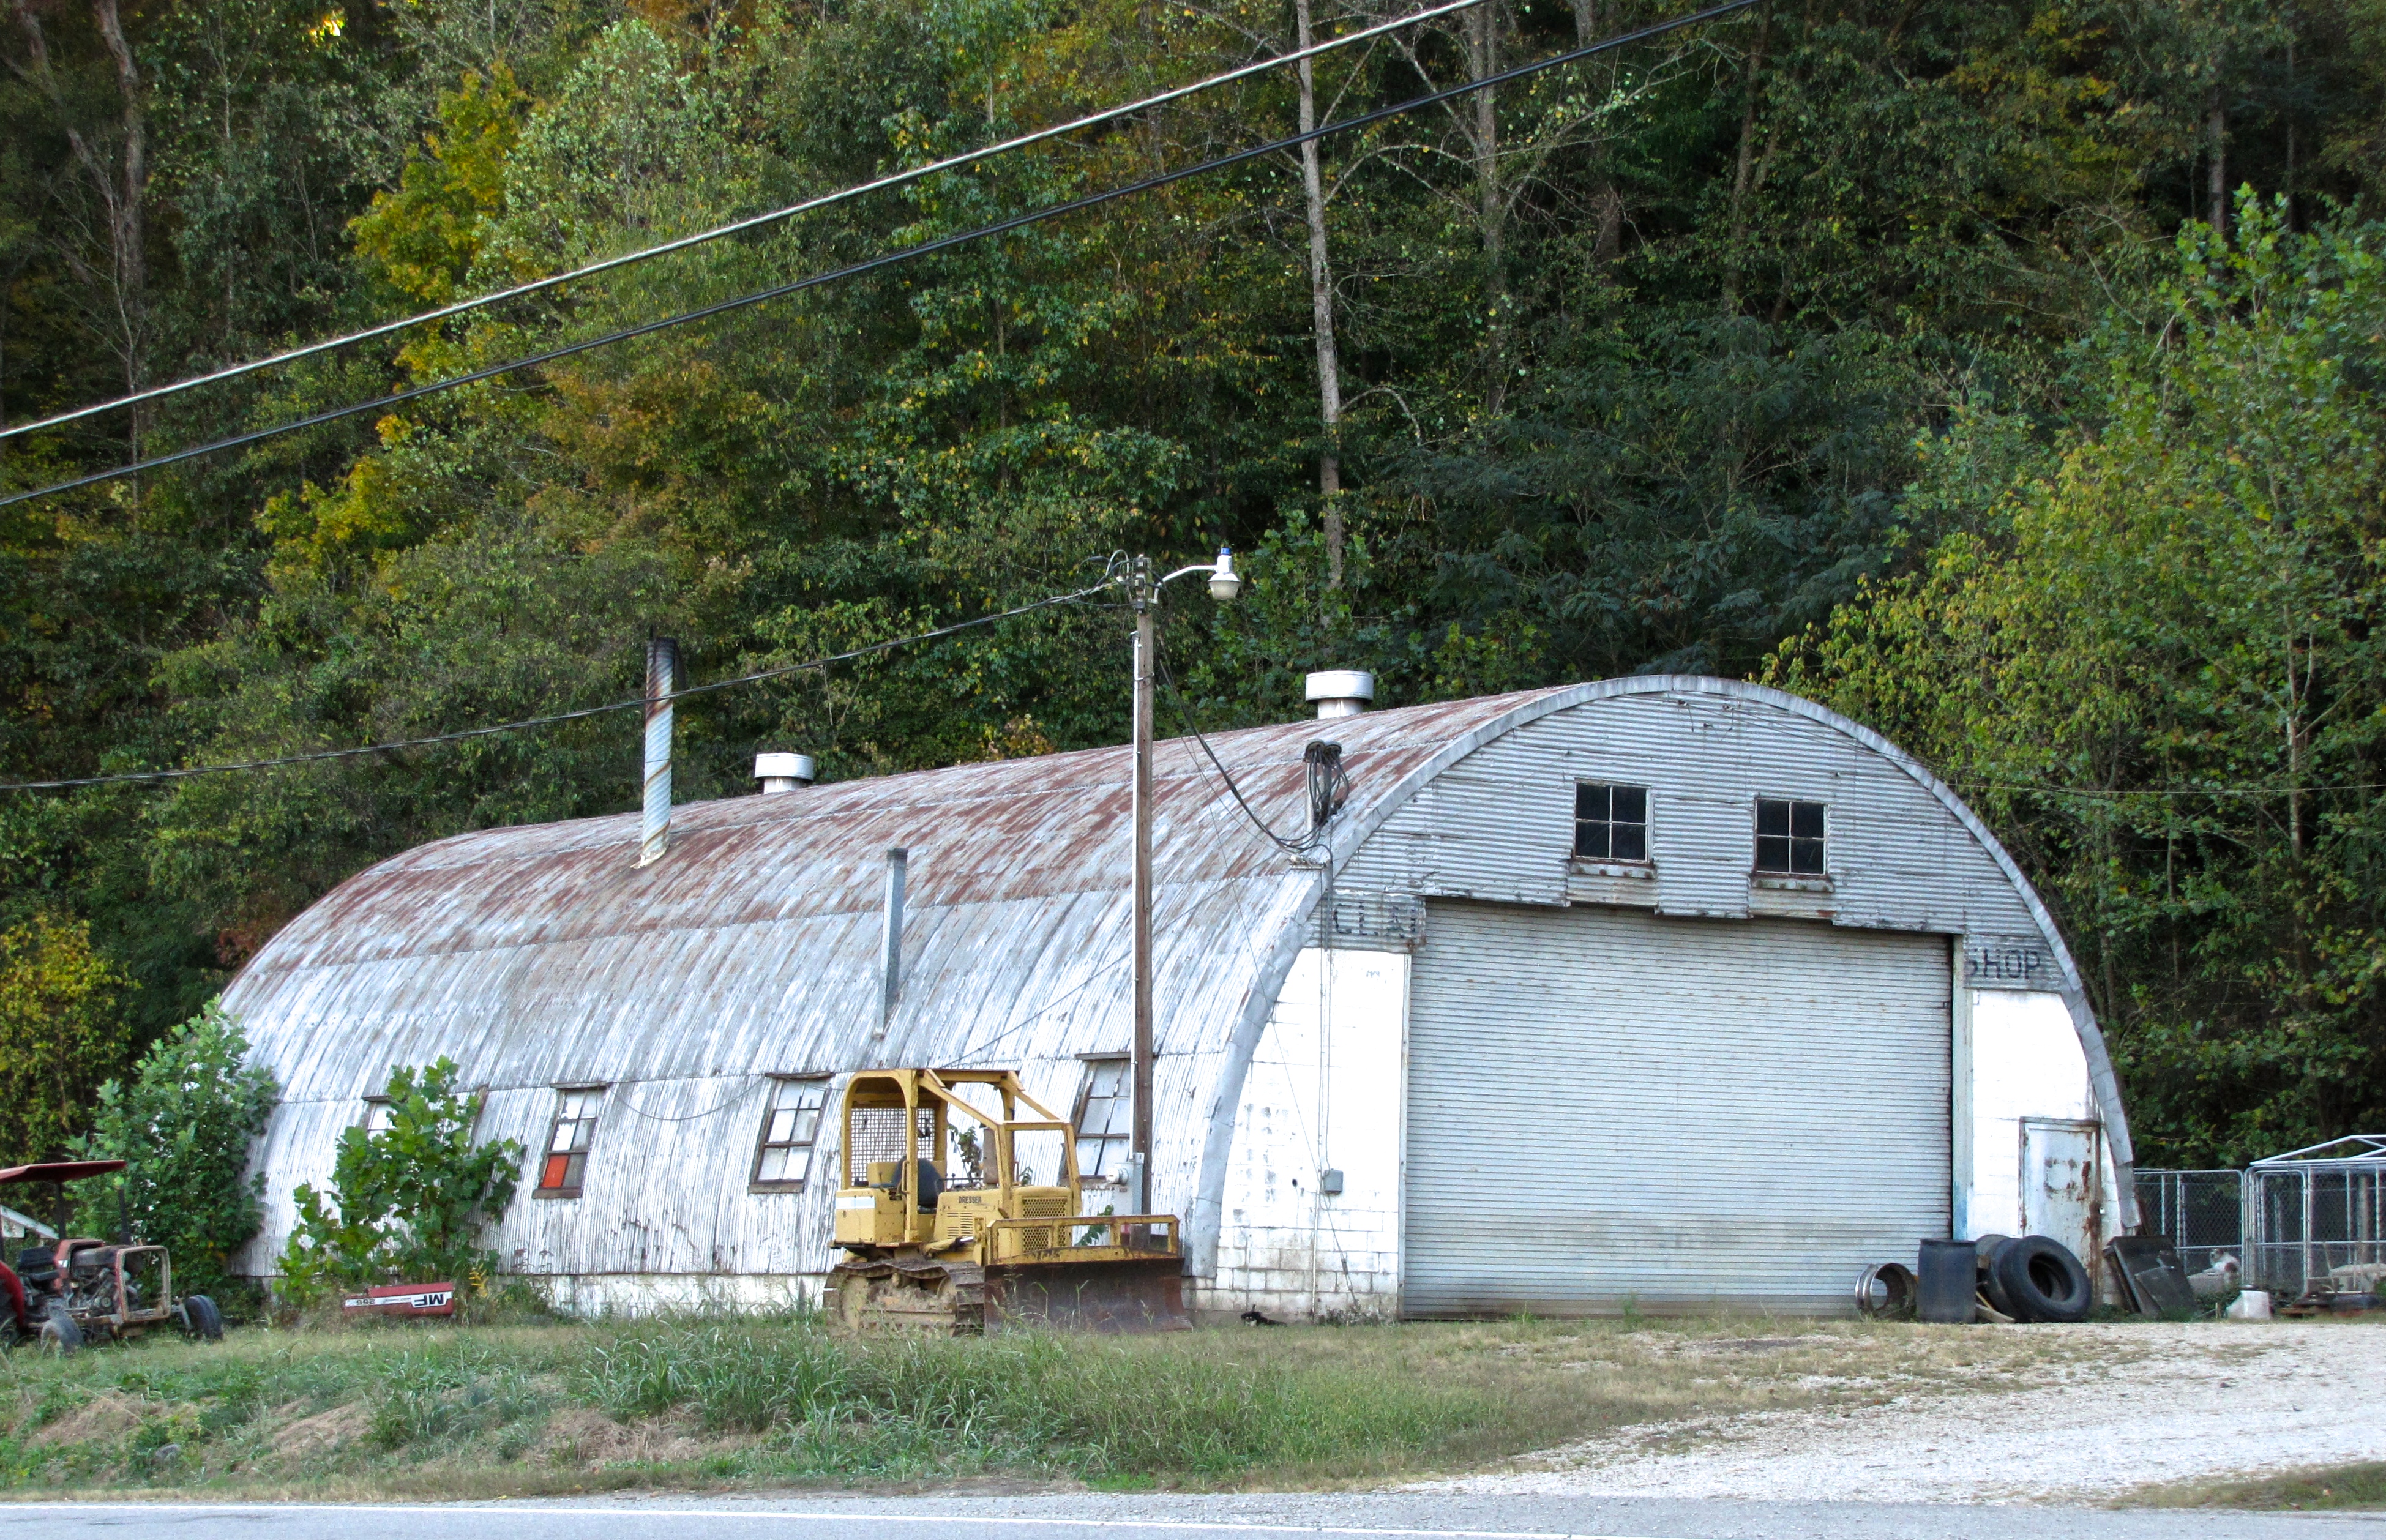 quonset hut in Old Town, ME